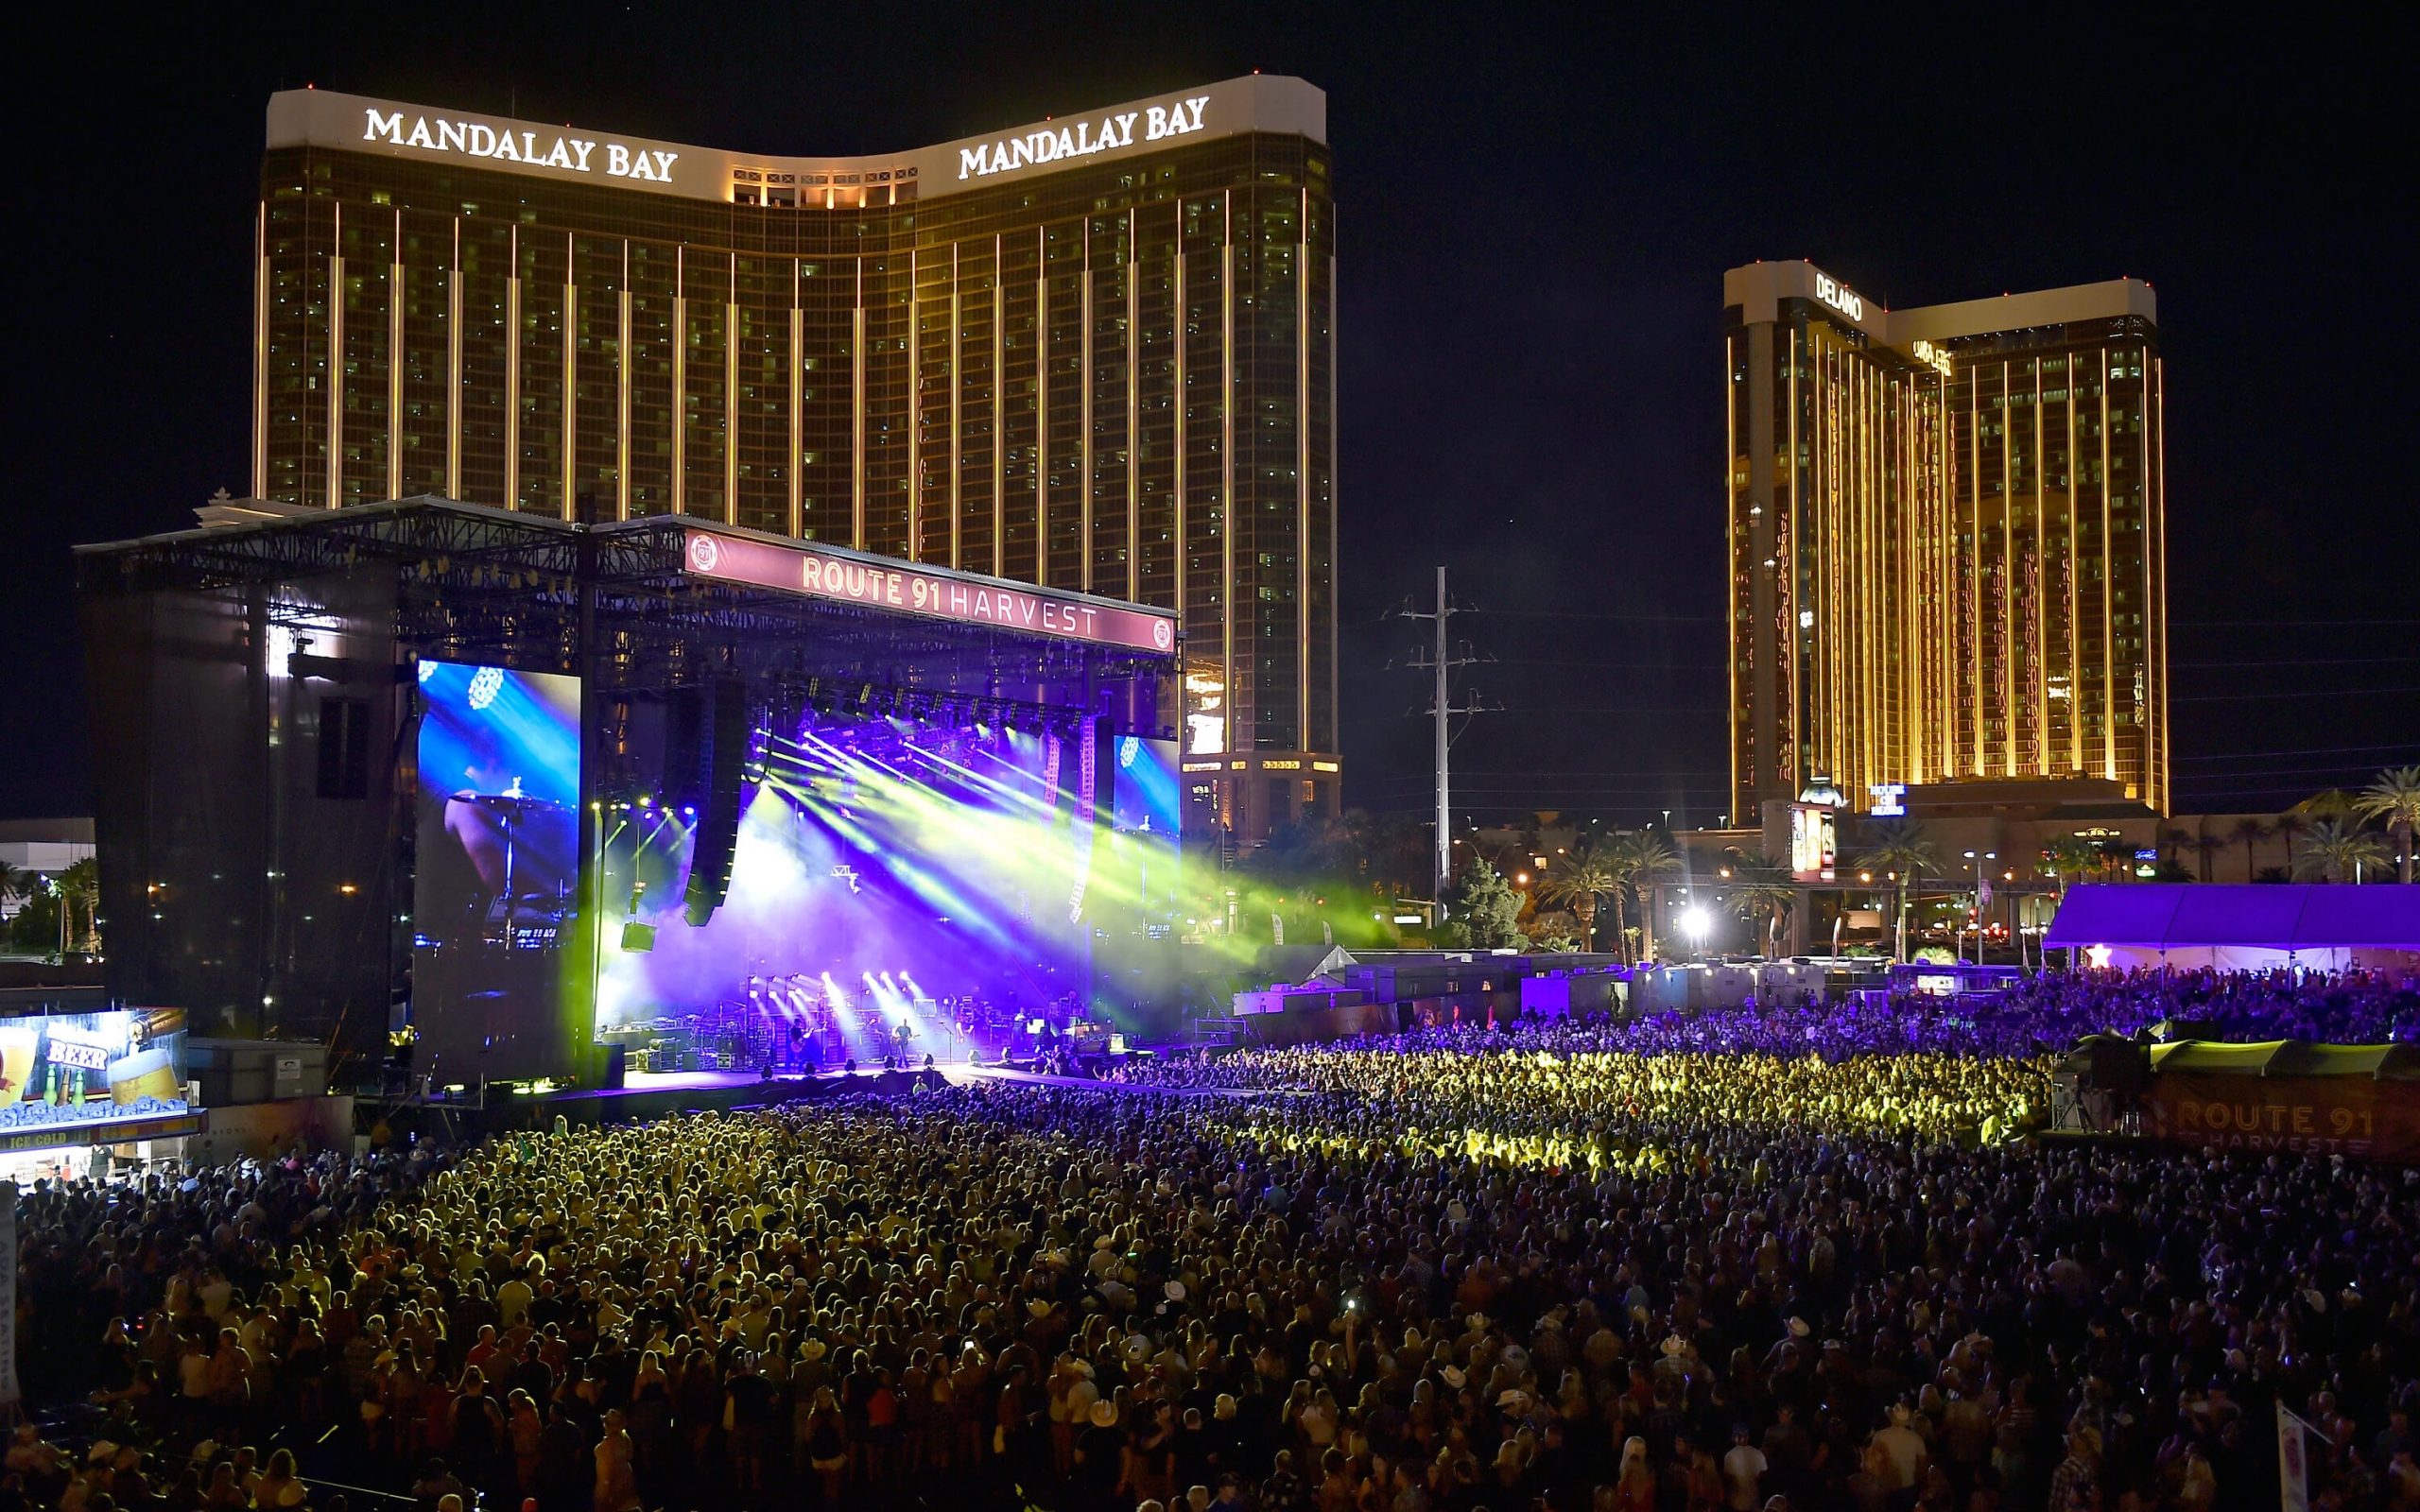 Plans Underway to Bring Route 91 Festival Back to Las Vegas Sounds Like